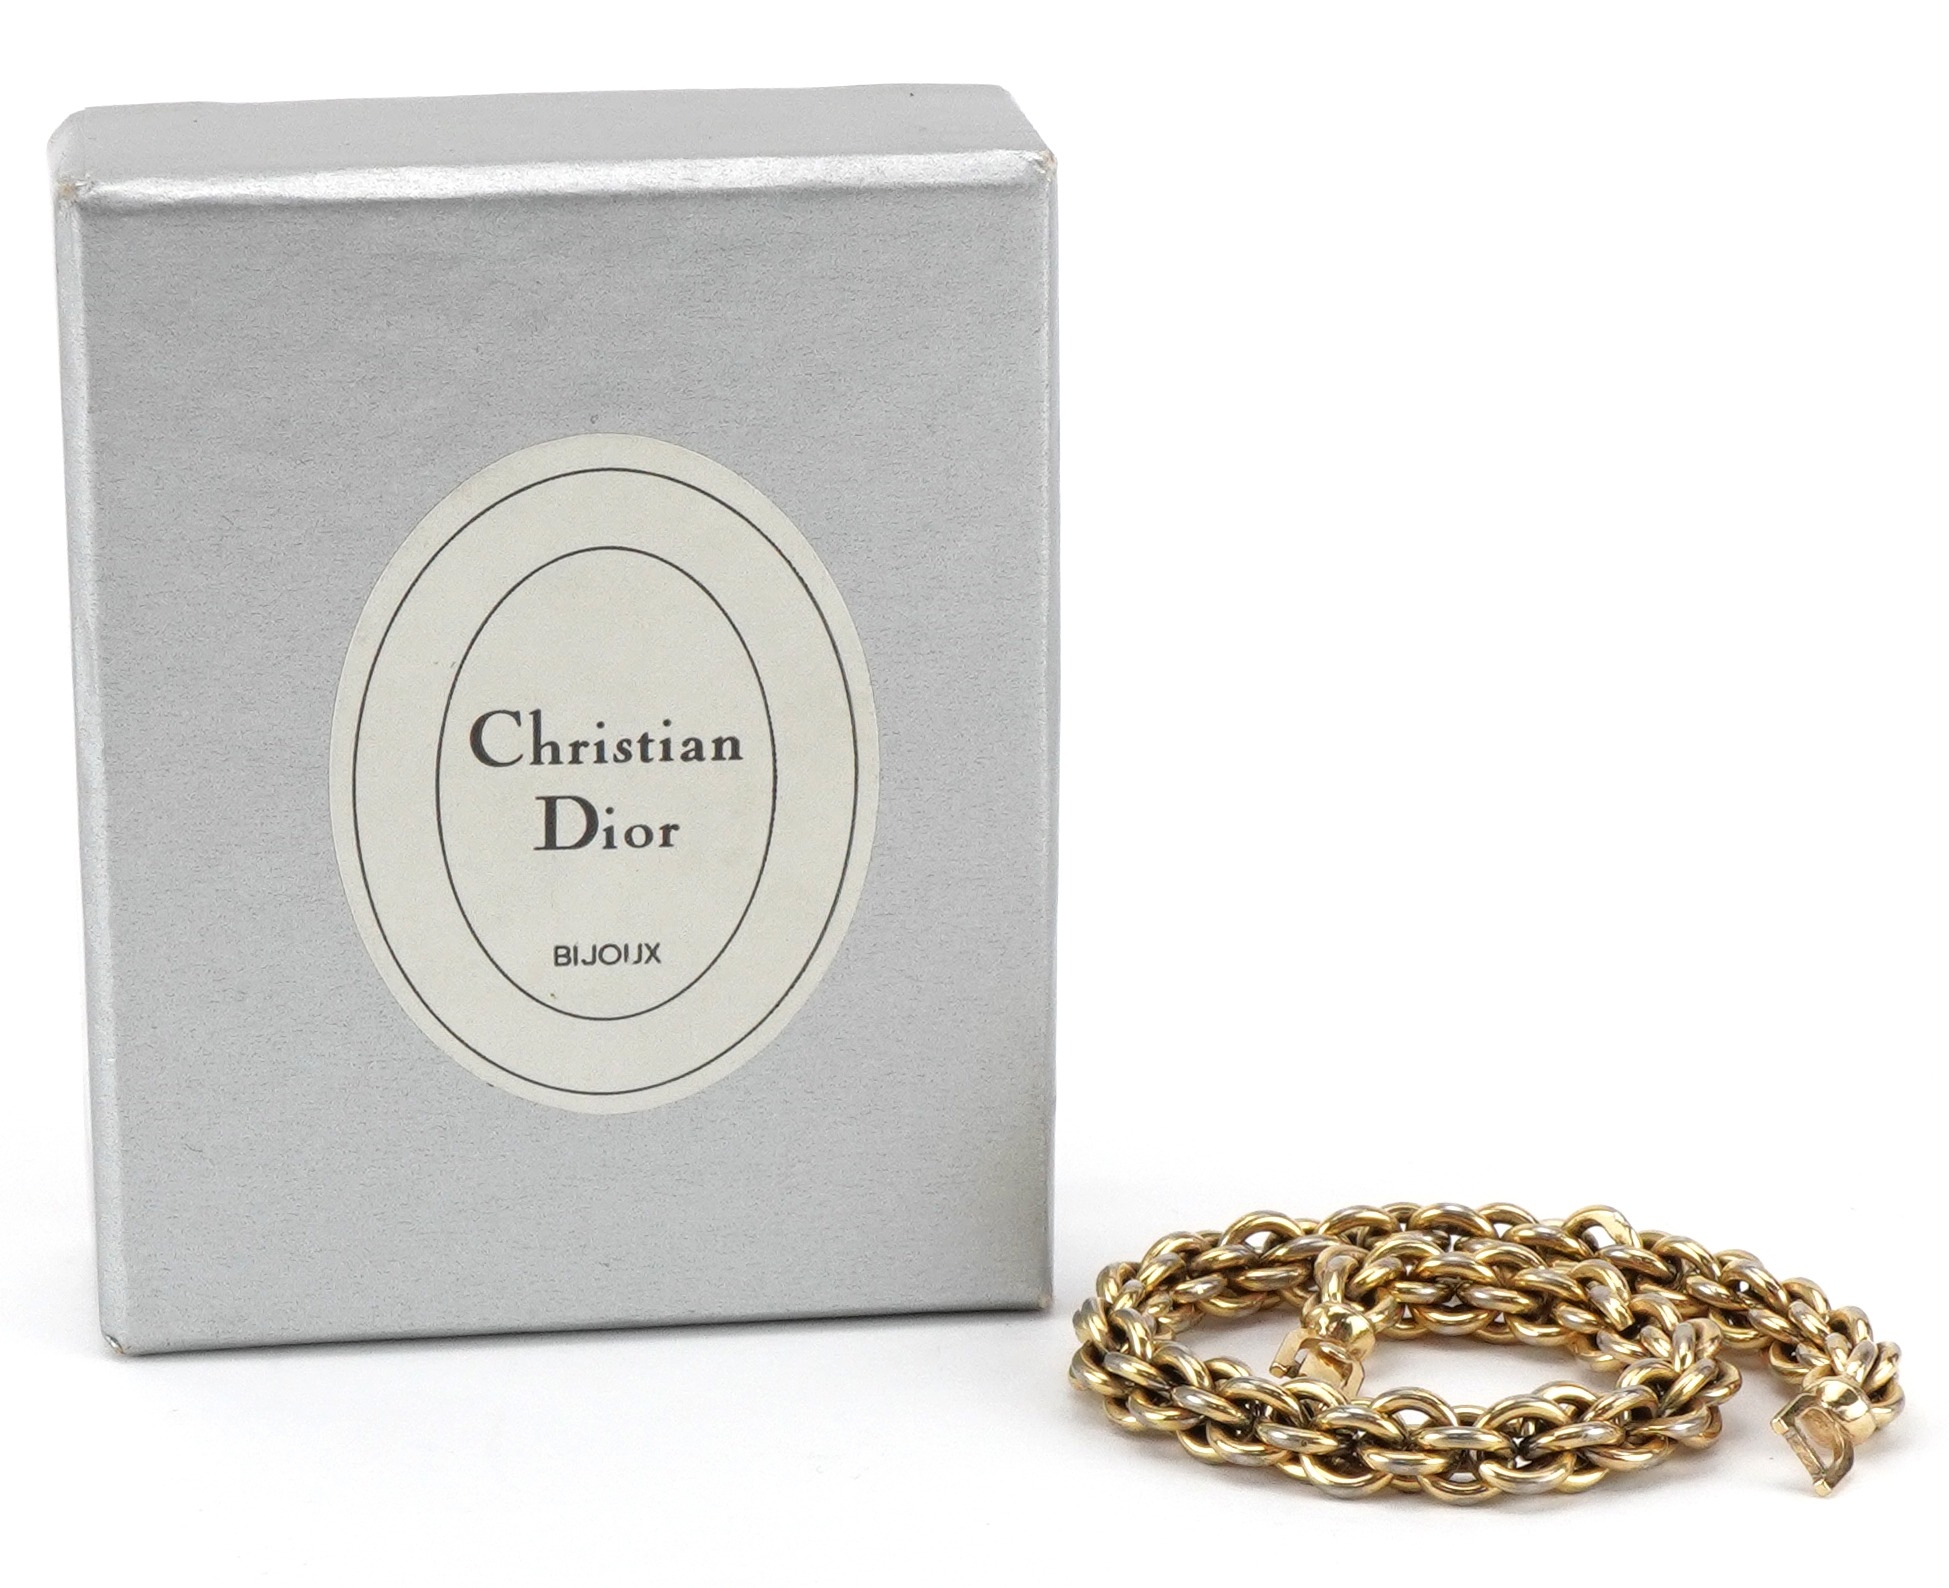 Christian Dior, vintage gold plated chain link bracelet with box, 20cm in length, 24.4g